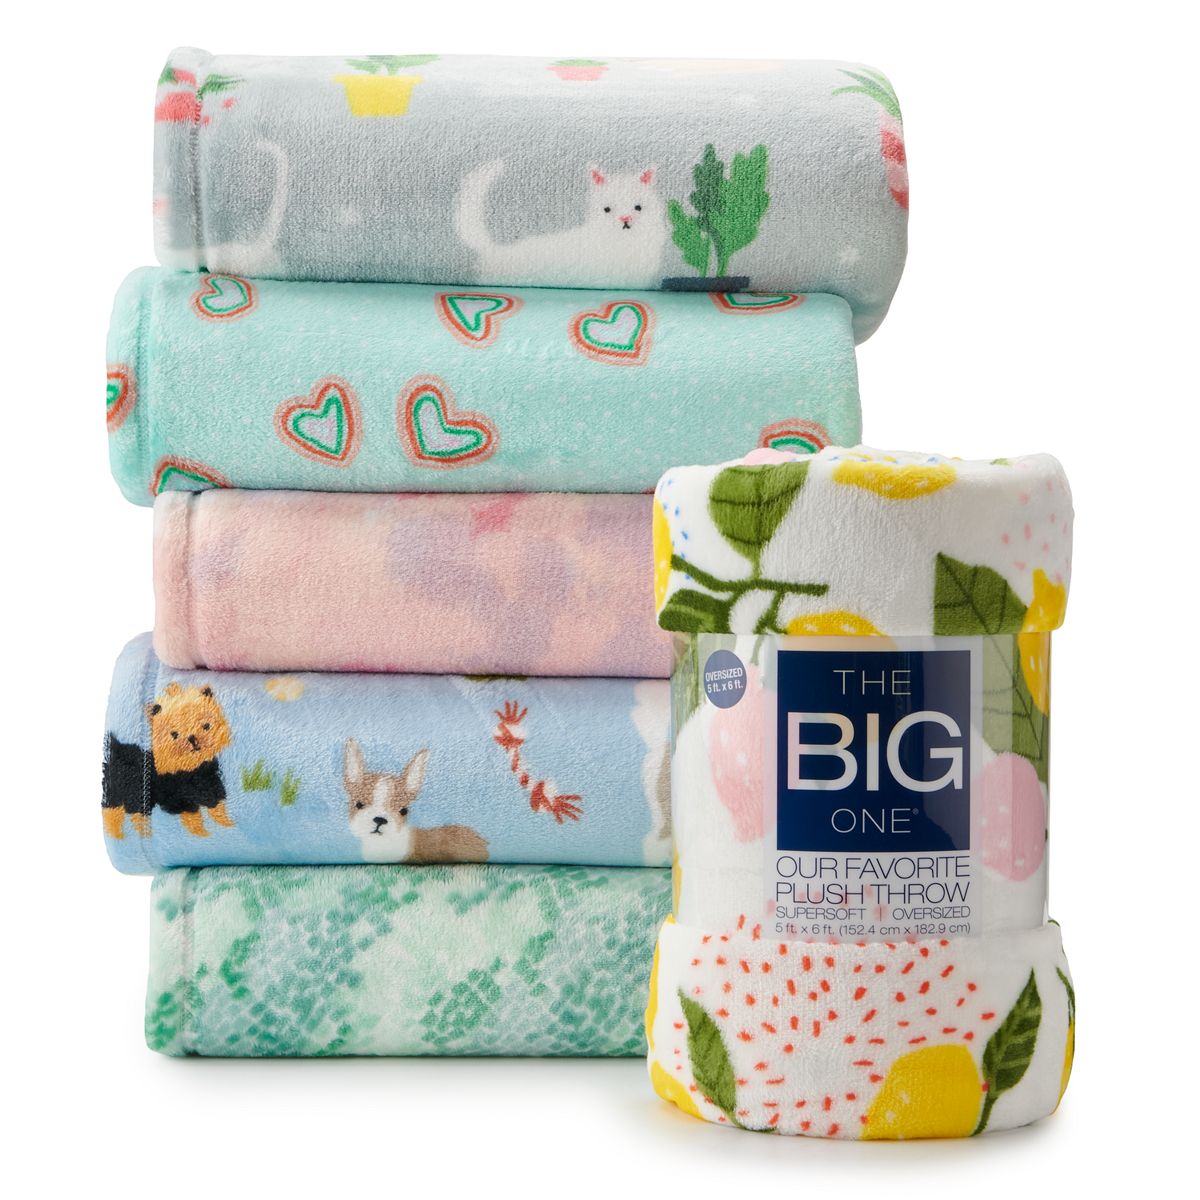 60" x 72" The Big One Oversized Supersoft Plush Throw $9.73 + Free Store Pickup at Kohl's or Free Shipping on $49+